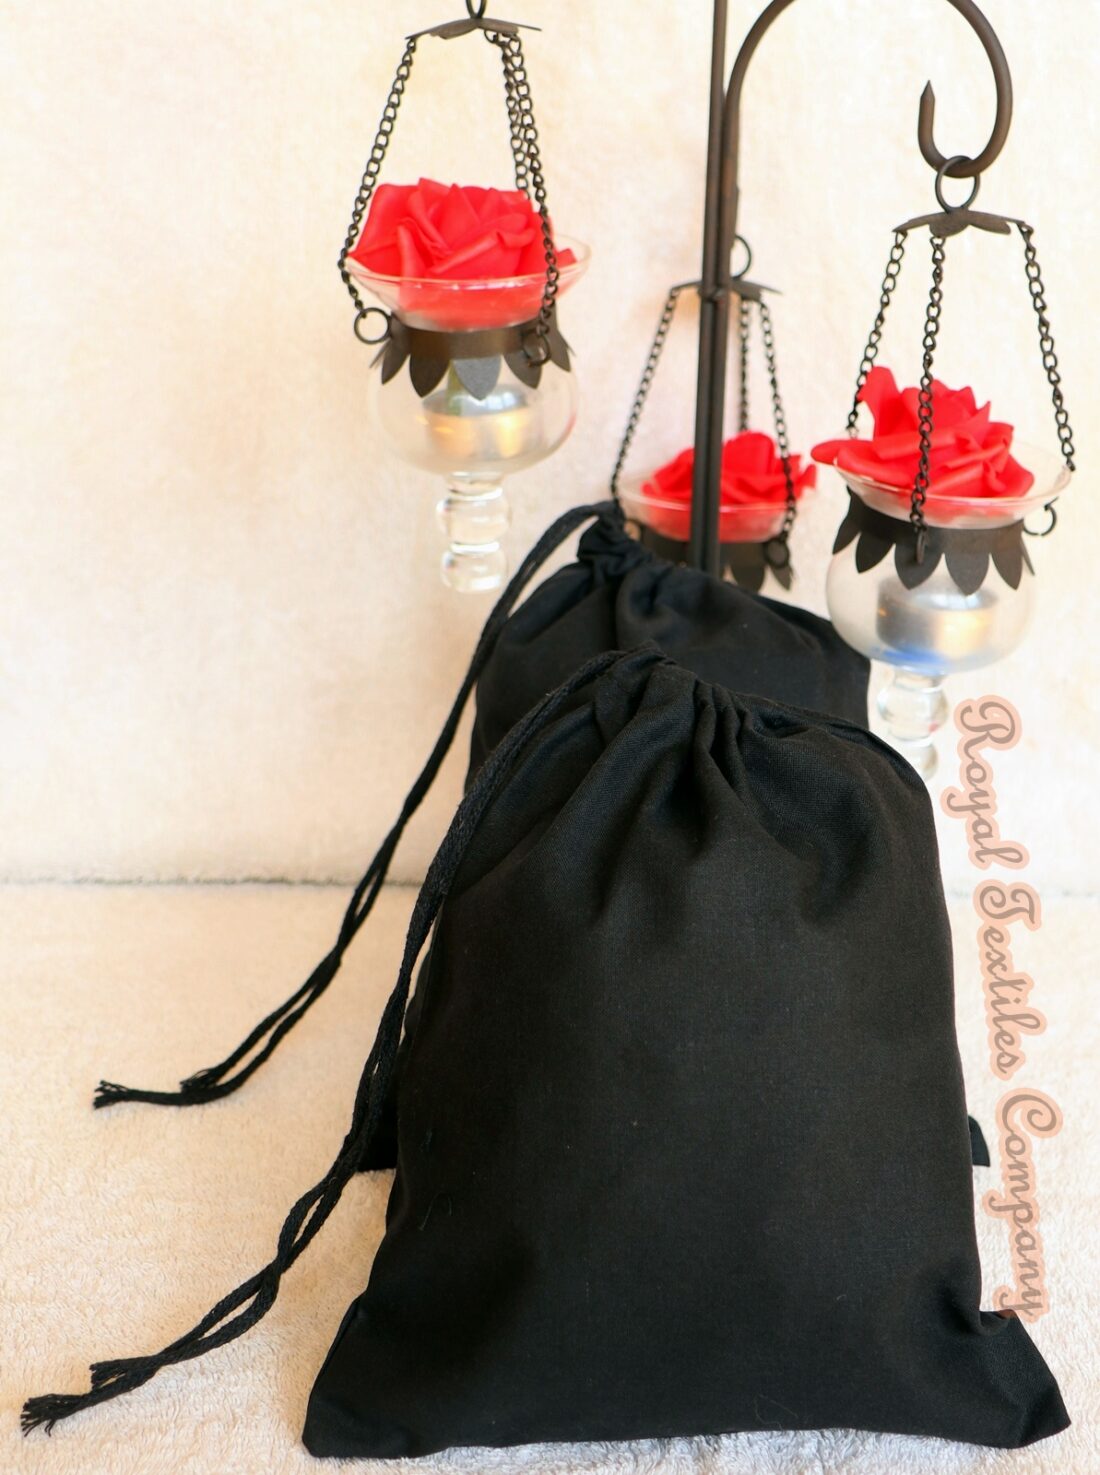 6 x 10 Inches Cotton Muslin Bags Double Drawstring Black Bags 100